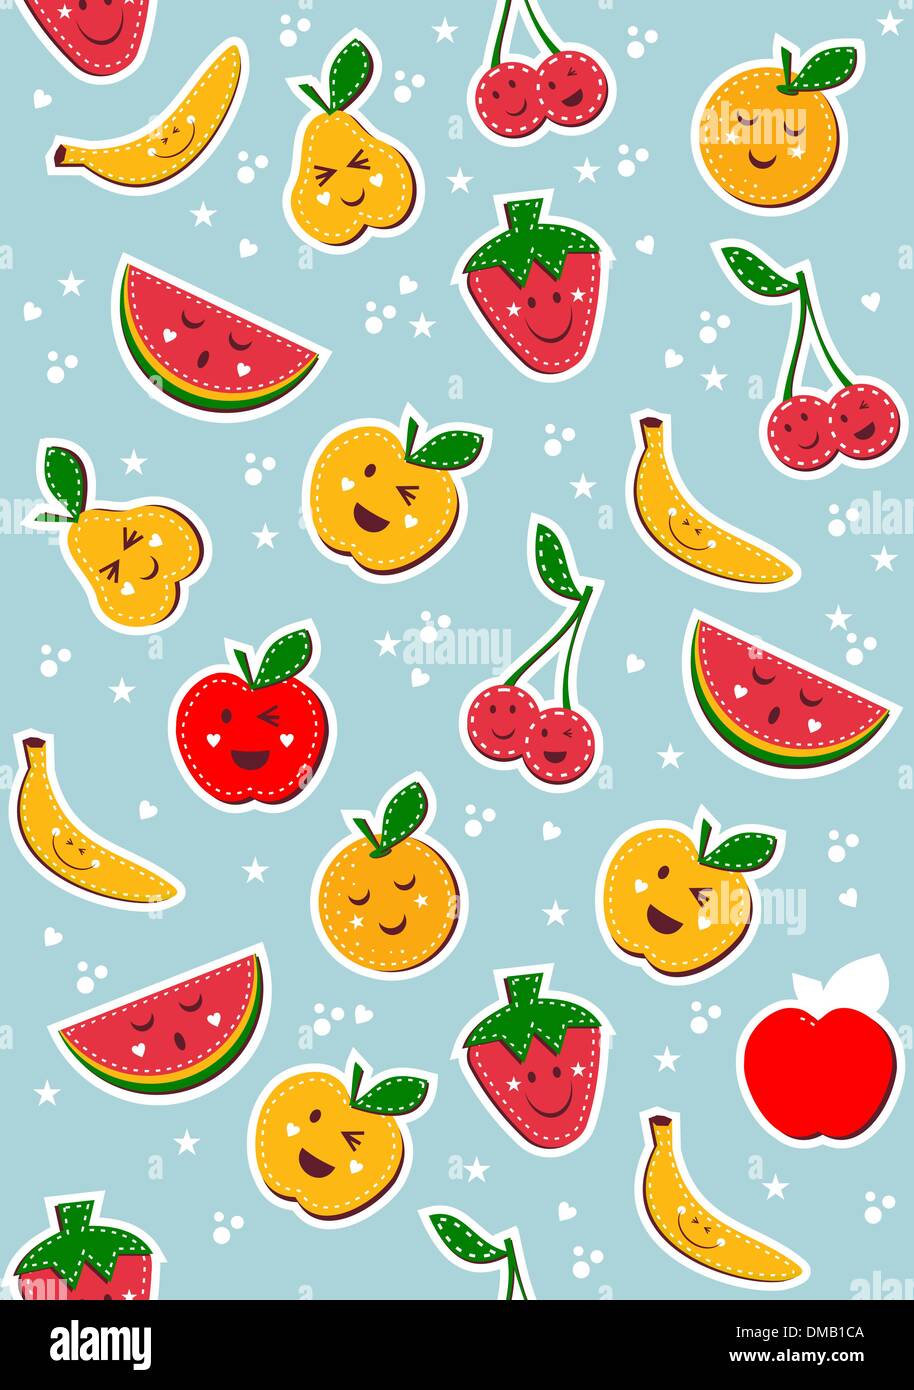 Happy fruits pattern Stock Vector